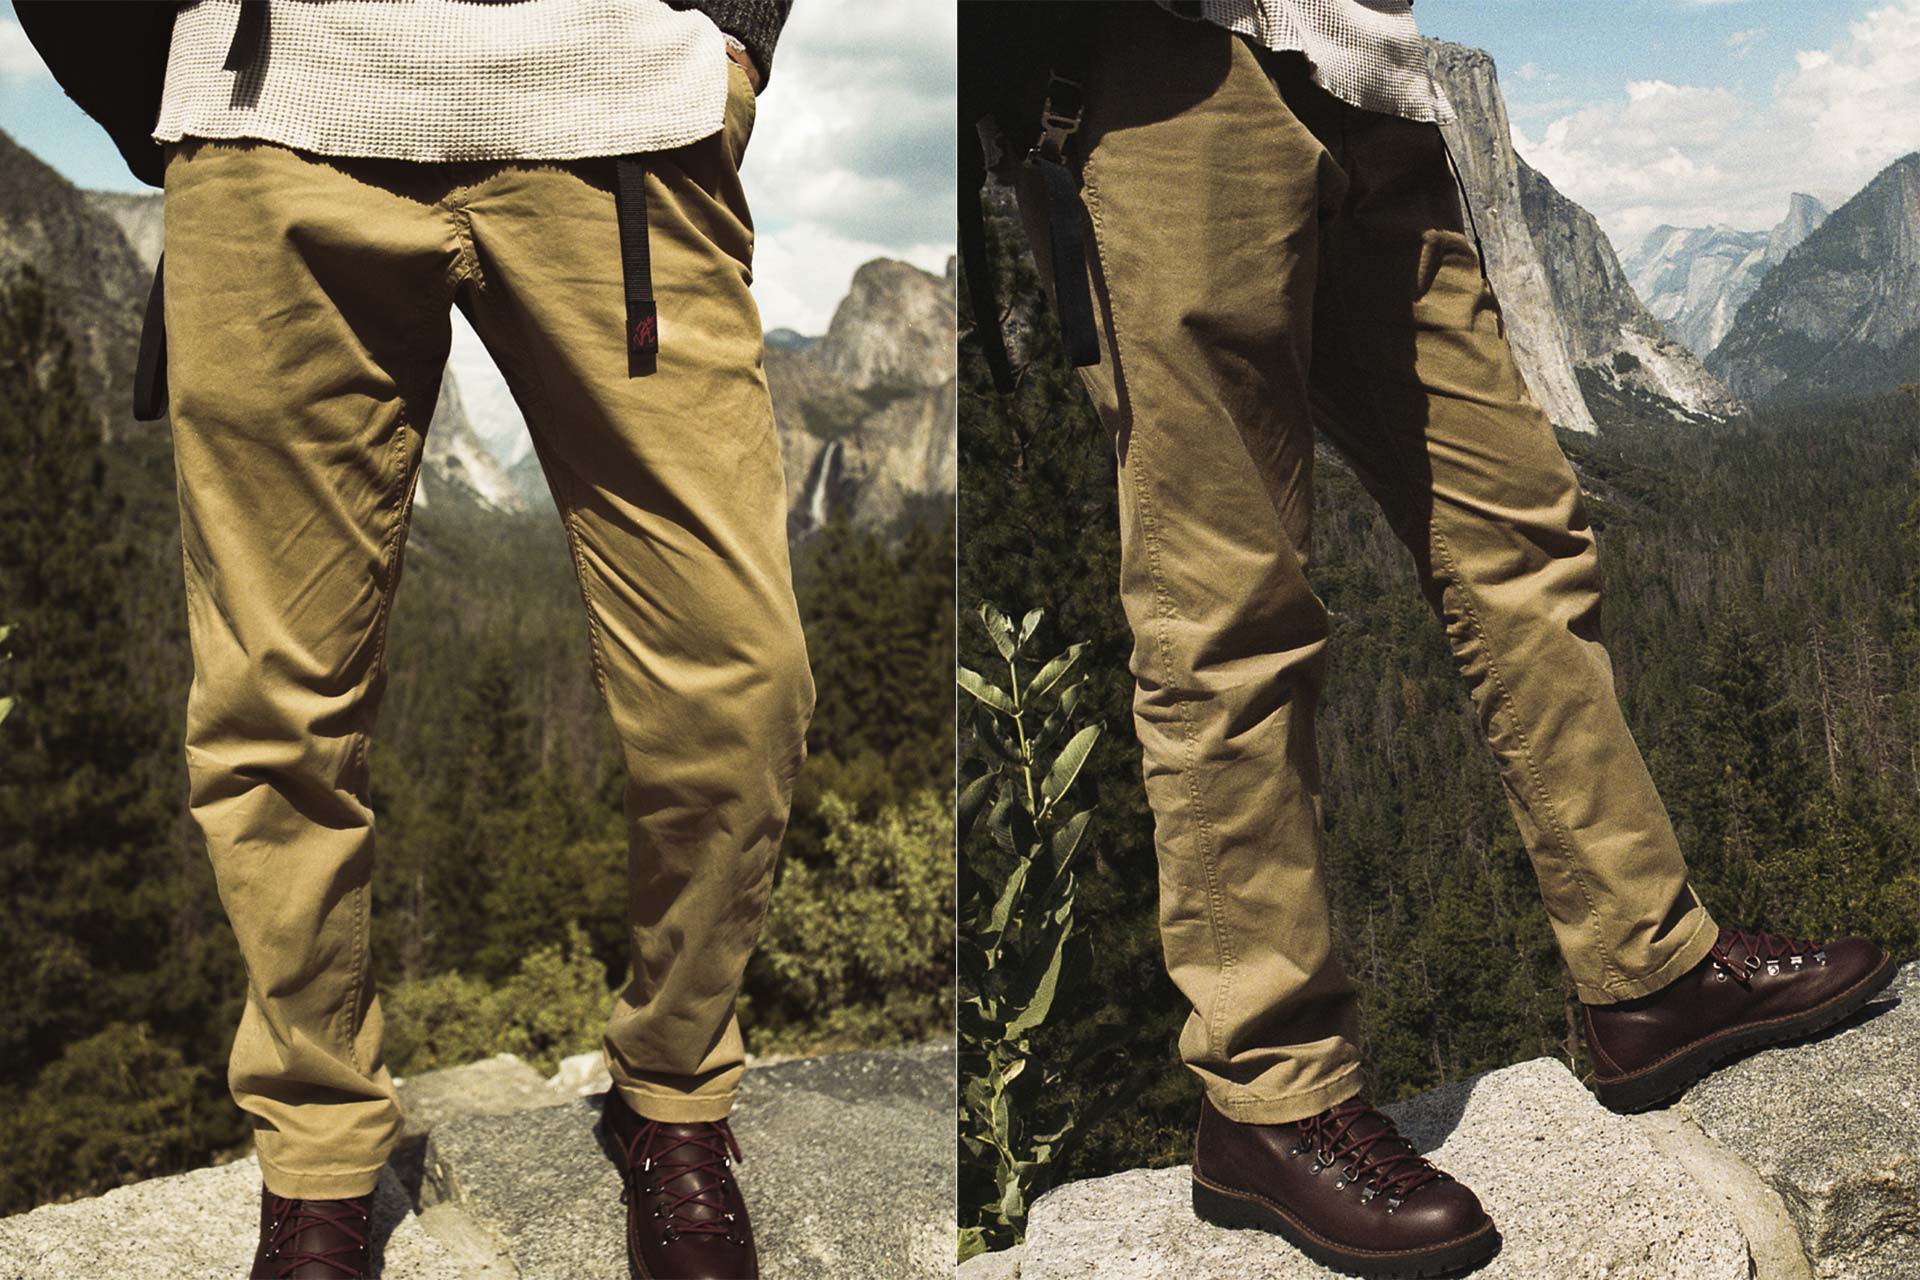 Gramicci: An Outdoor Brand With Streetwear Roots | Stuarts London